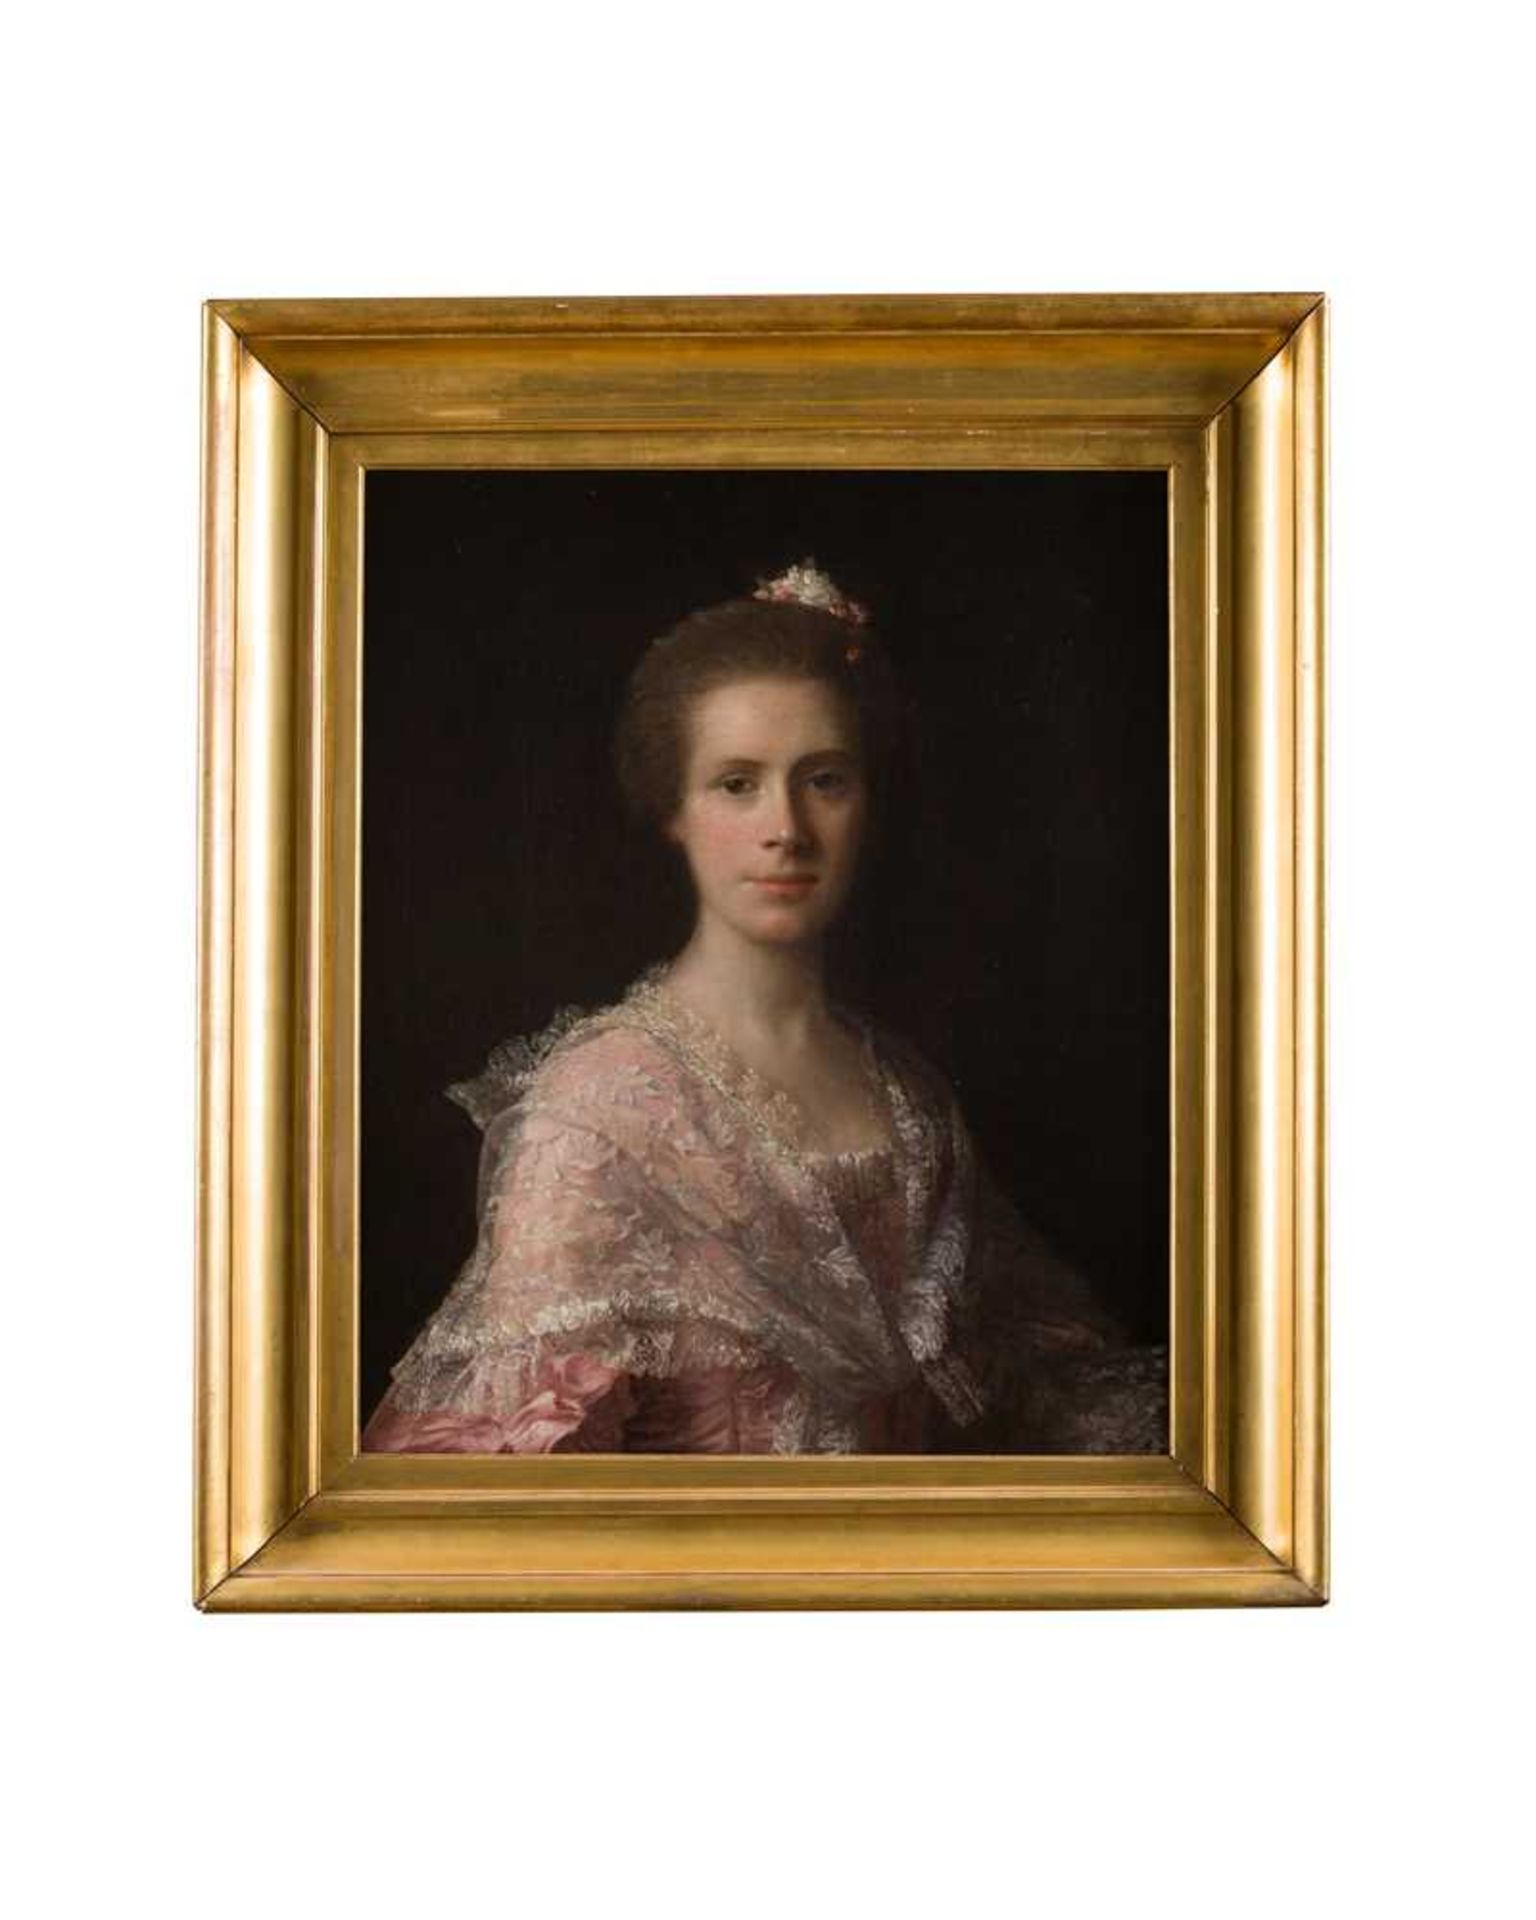 ATTRIBUTED TO ALLAN RAMSAY HALF LENGTH PORTRAIT OF MARGARET MITCHELSON, LADY SWINTON - Image 2 of 2